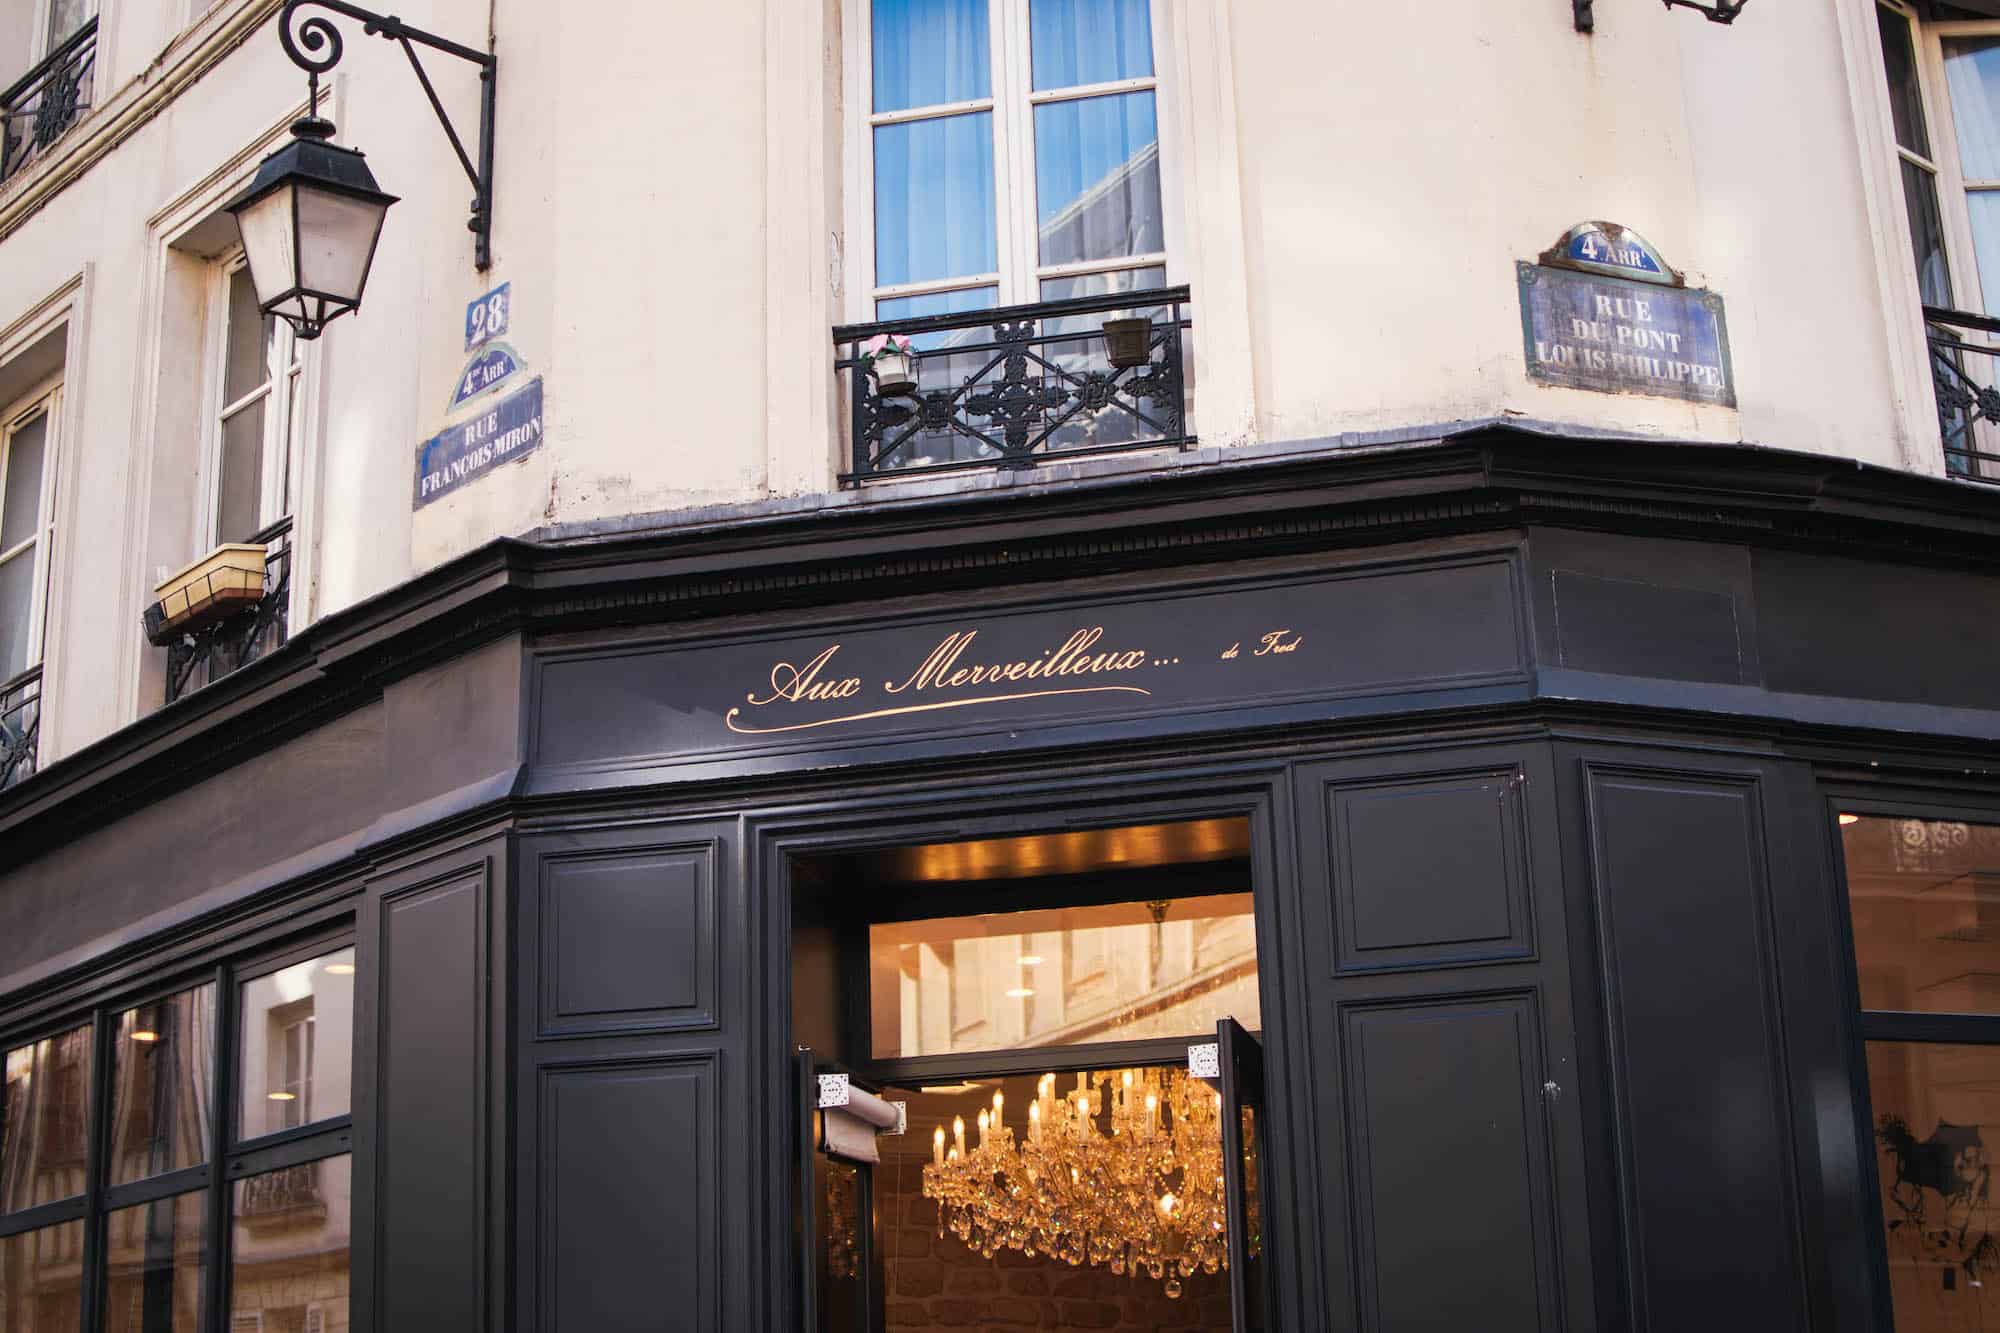 Aux Merveilleux de Fred, with a location in Paris' 4th arrondissement, is known for its delicate meringues. Step inside the shop to admire the pastries under the splendor of a crystal chandelier. 